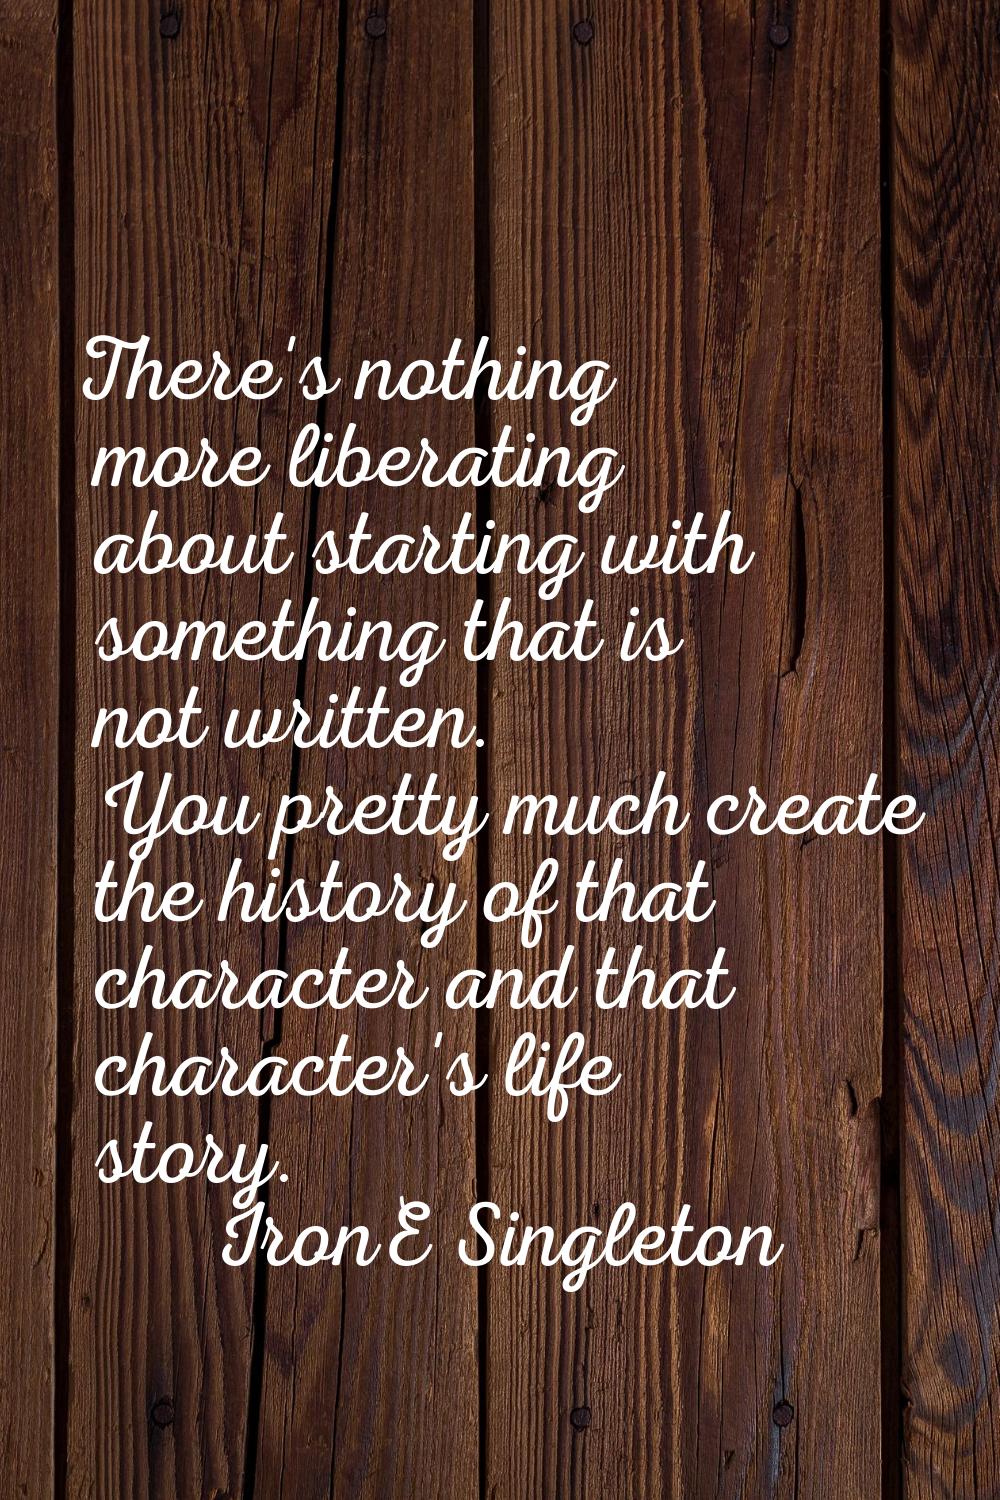 There's nothing more liberating about starting with something that is not written. You pretty much 